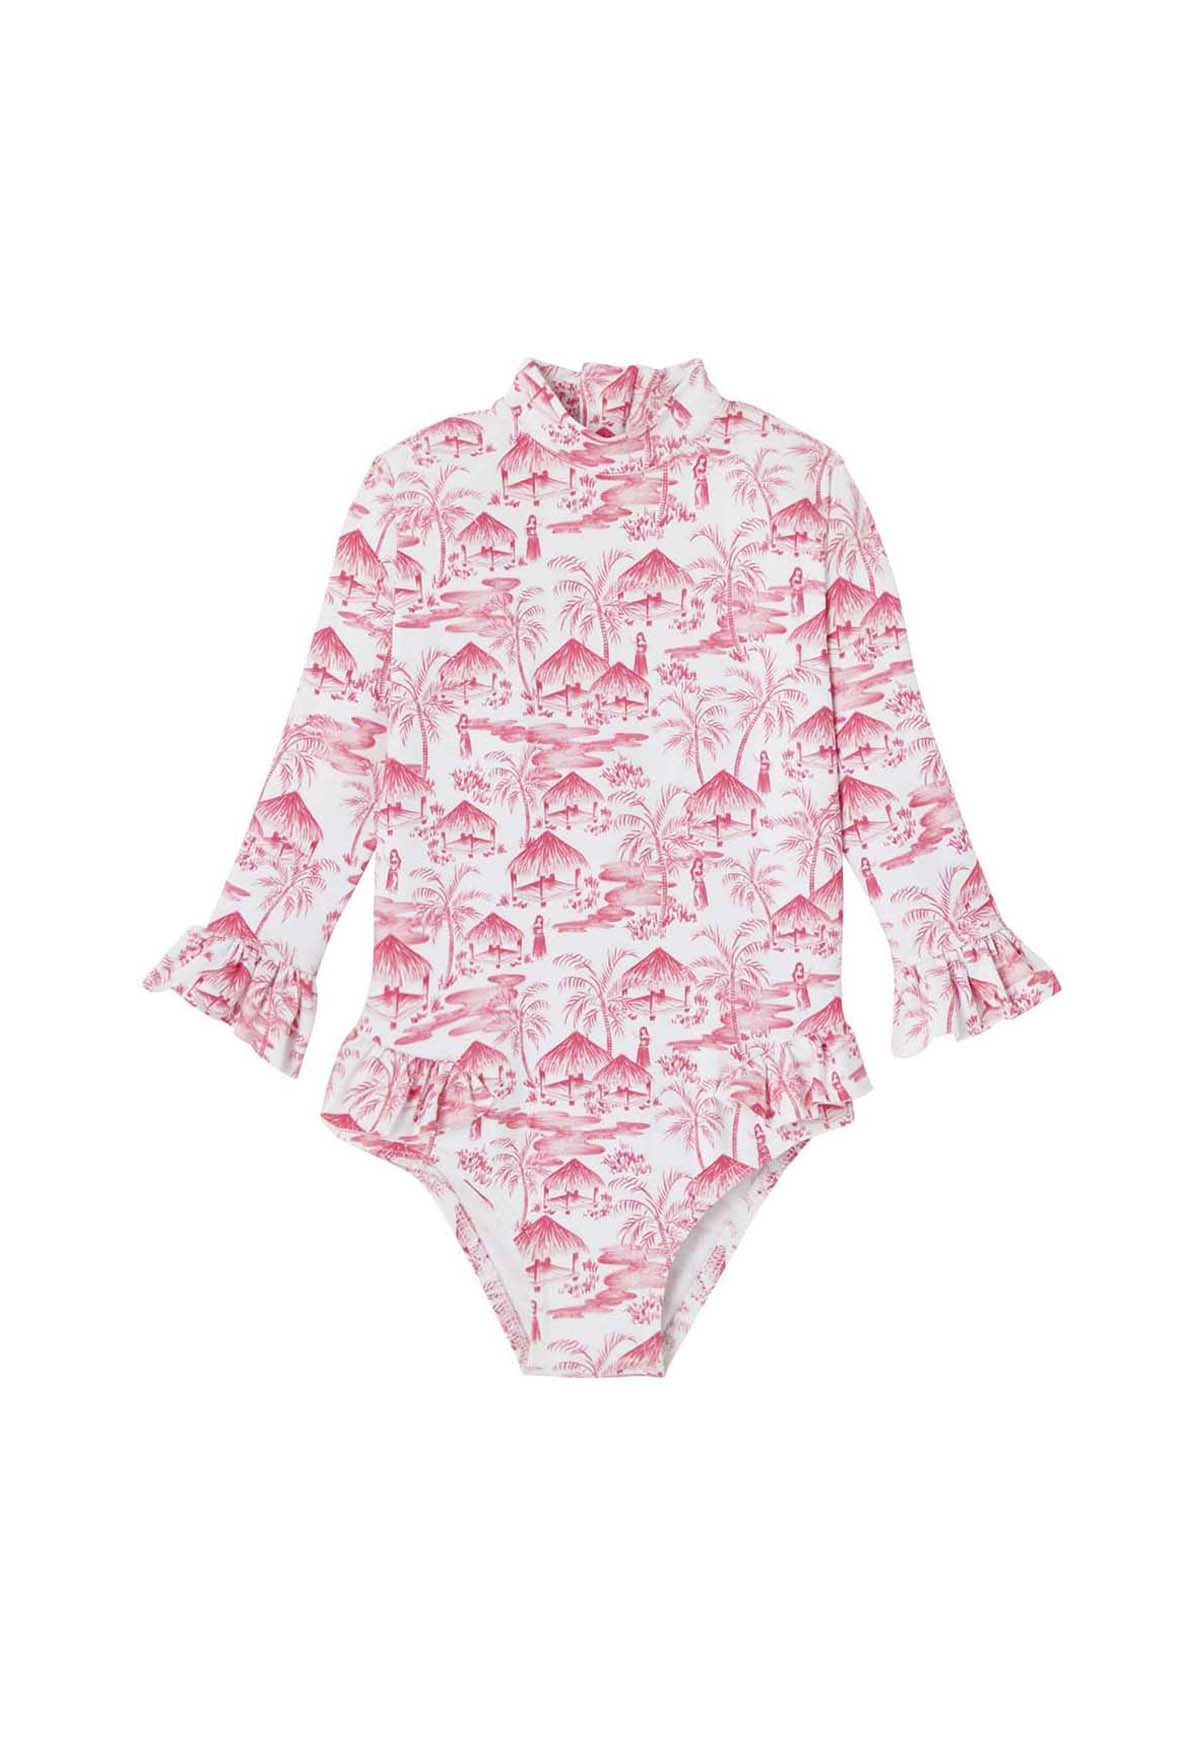 Long-sleeved baby swimming costume in pink vahine pattern